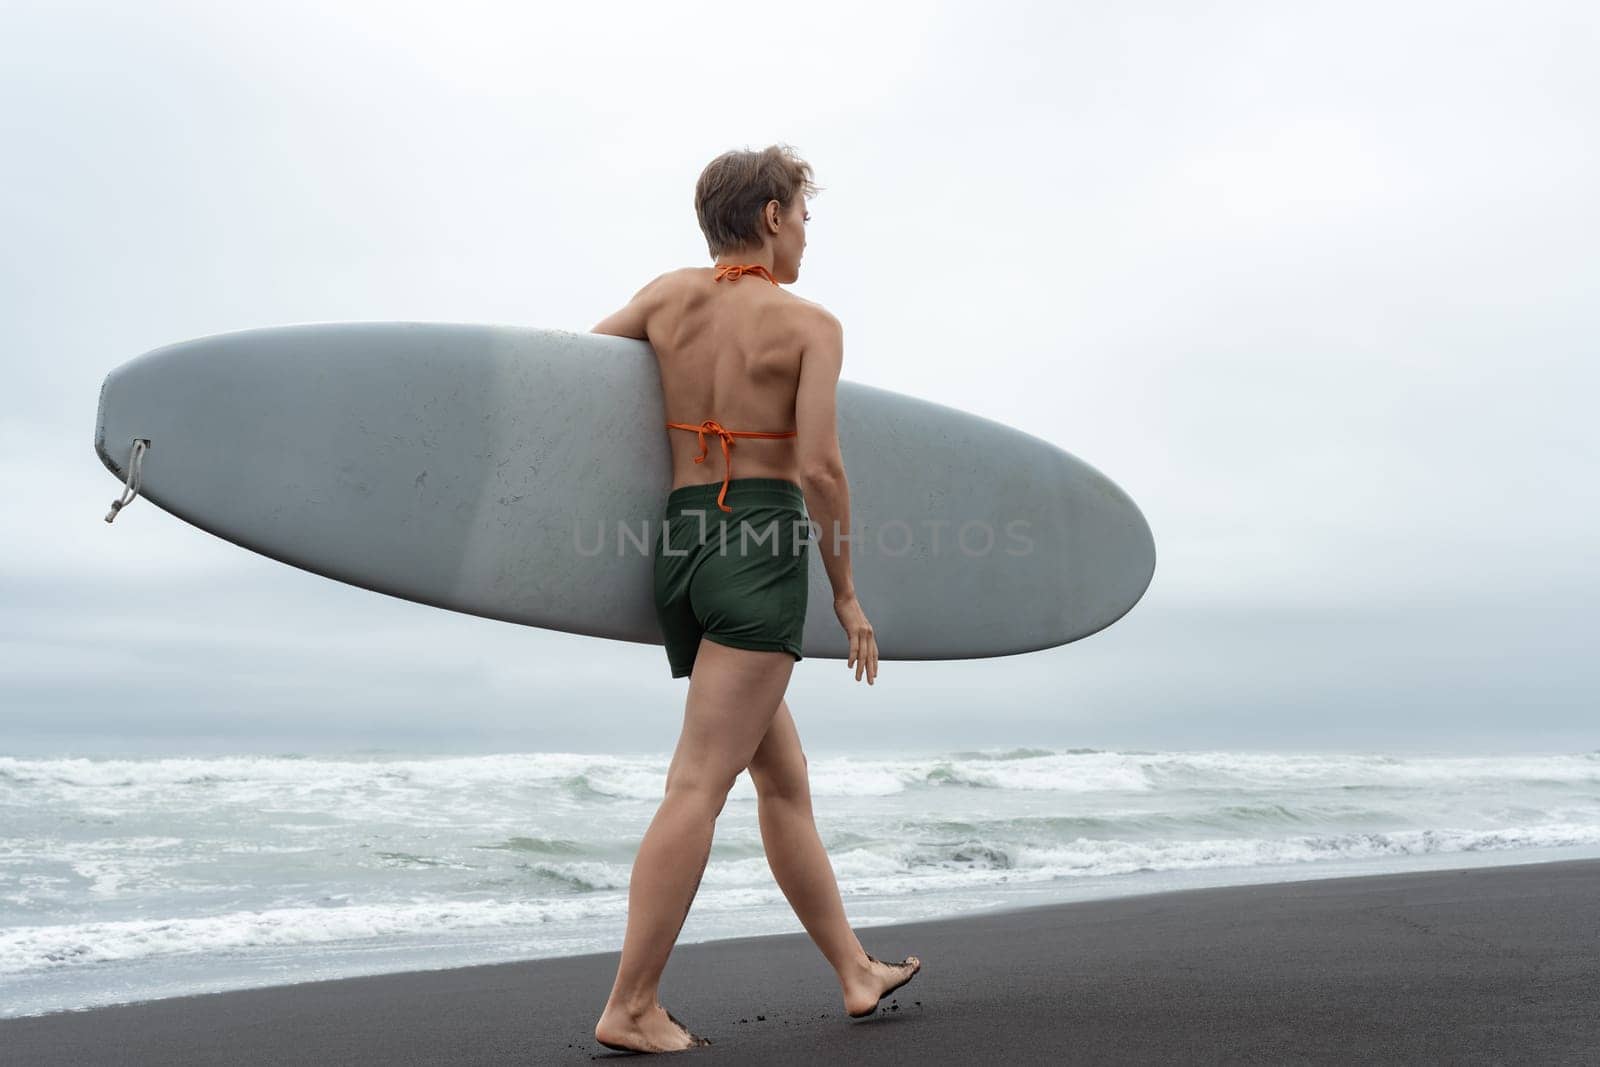 Rear view of sexuality female surfer walking on black sandy beach carrying white surfboard against background of ocean waves during summer resort holiday. Healthy lifestyle concept